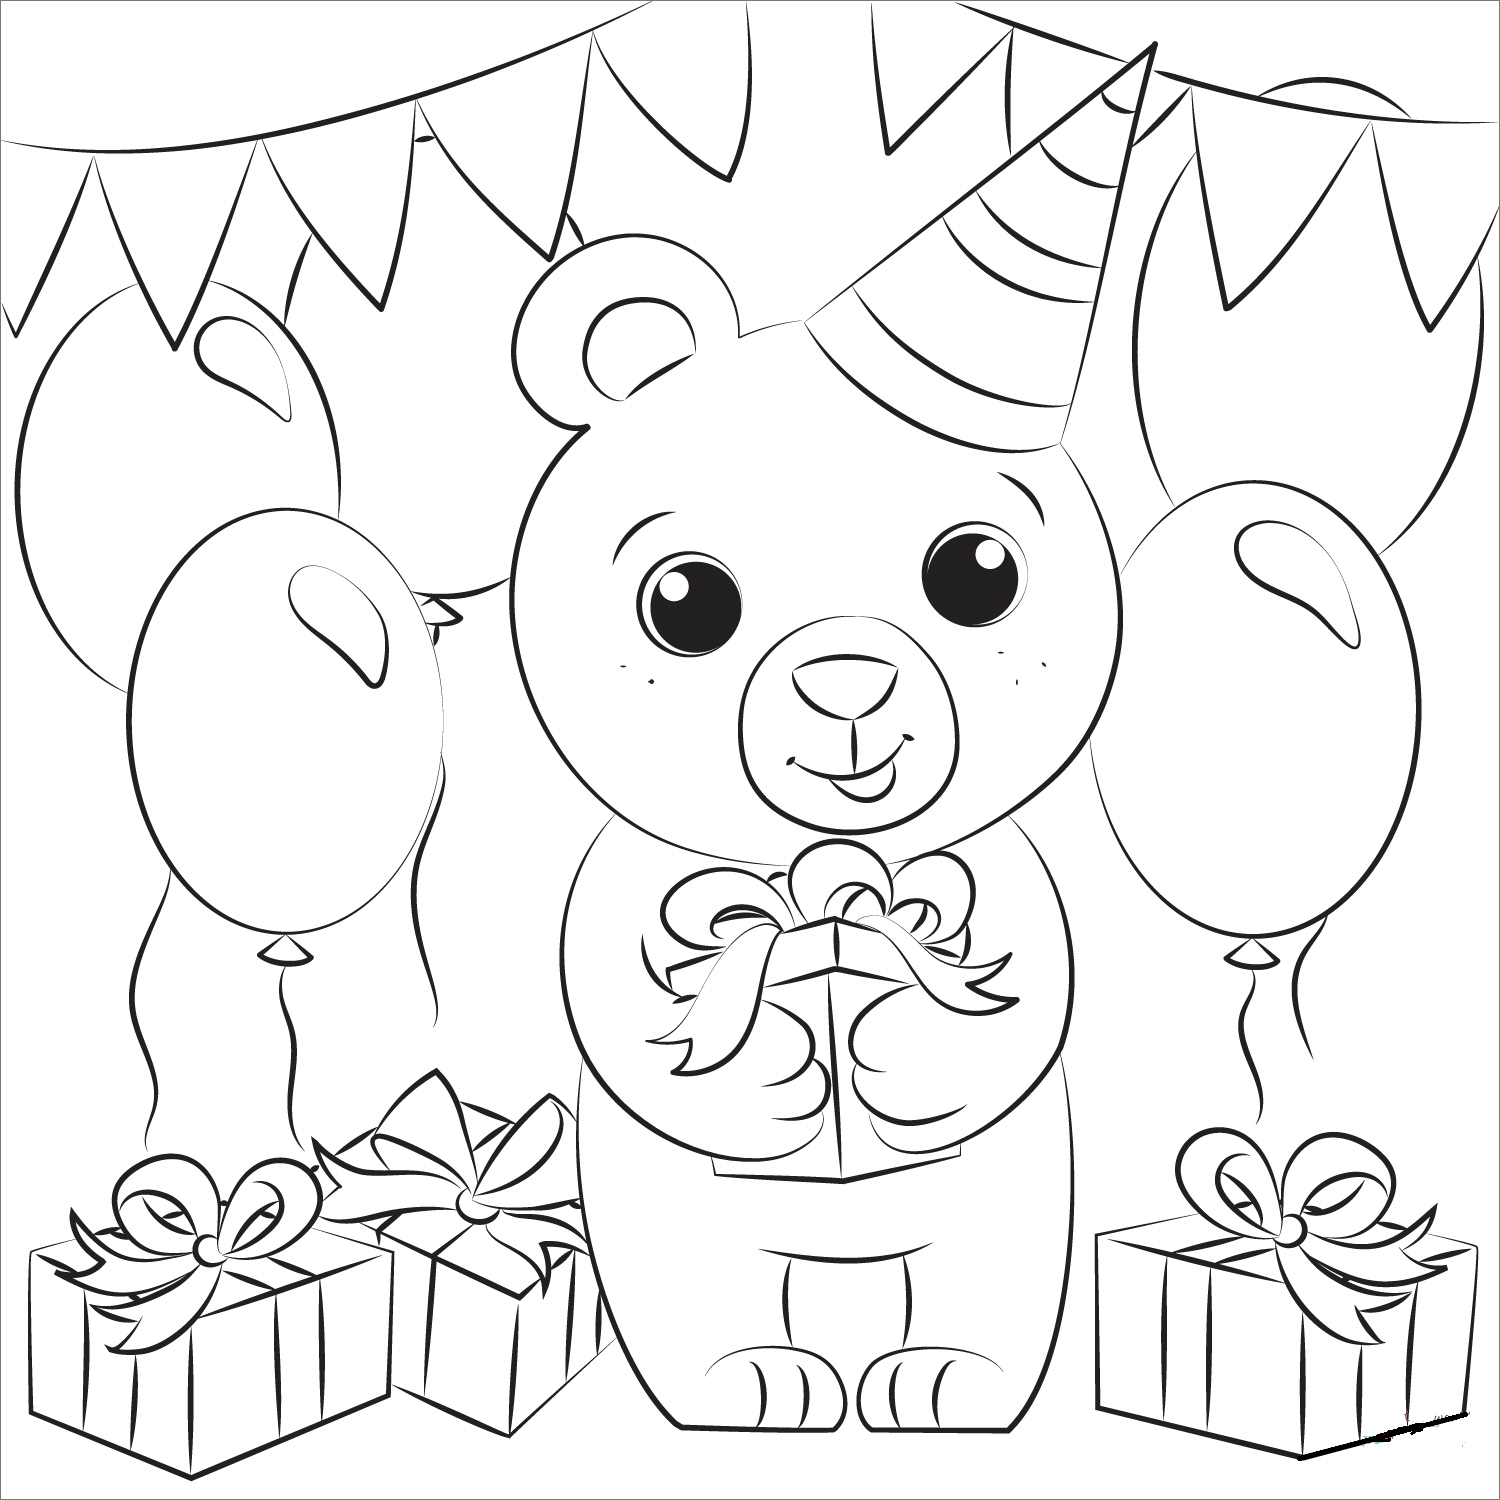 Bears Birthday Coloring Page